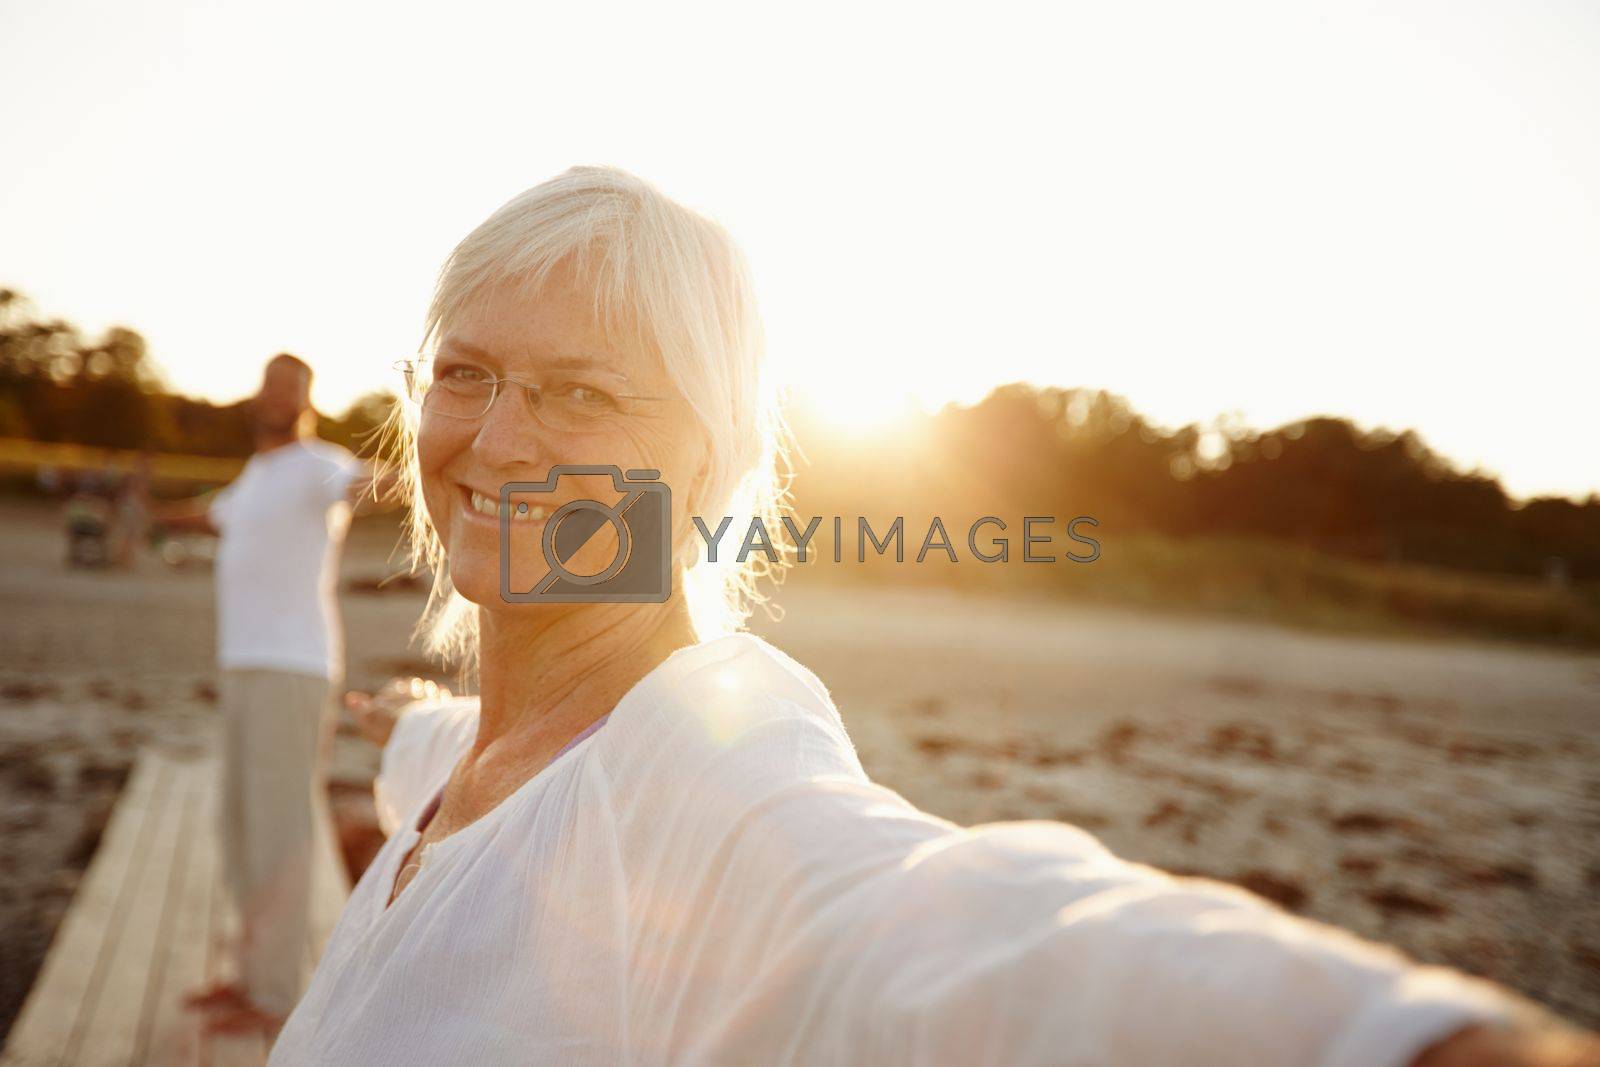 Royalty free image of Yoga makes me feel great. a mature woman doing yoga on the beach with her husband in the background. by YuriArcurs